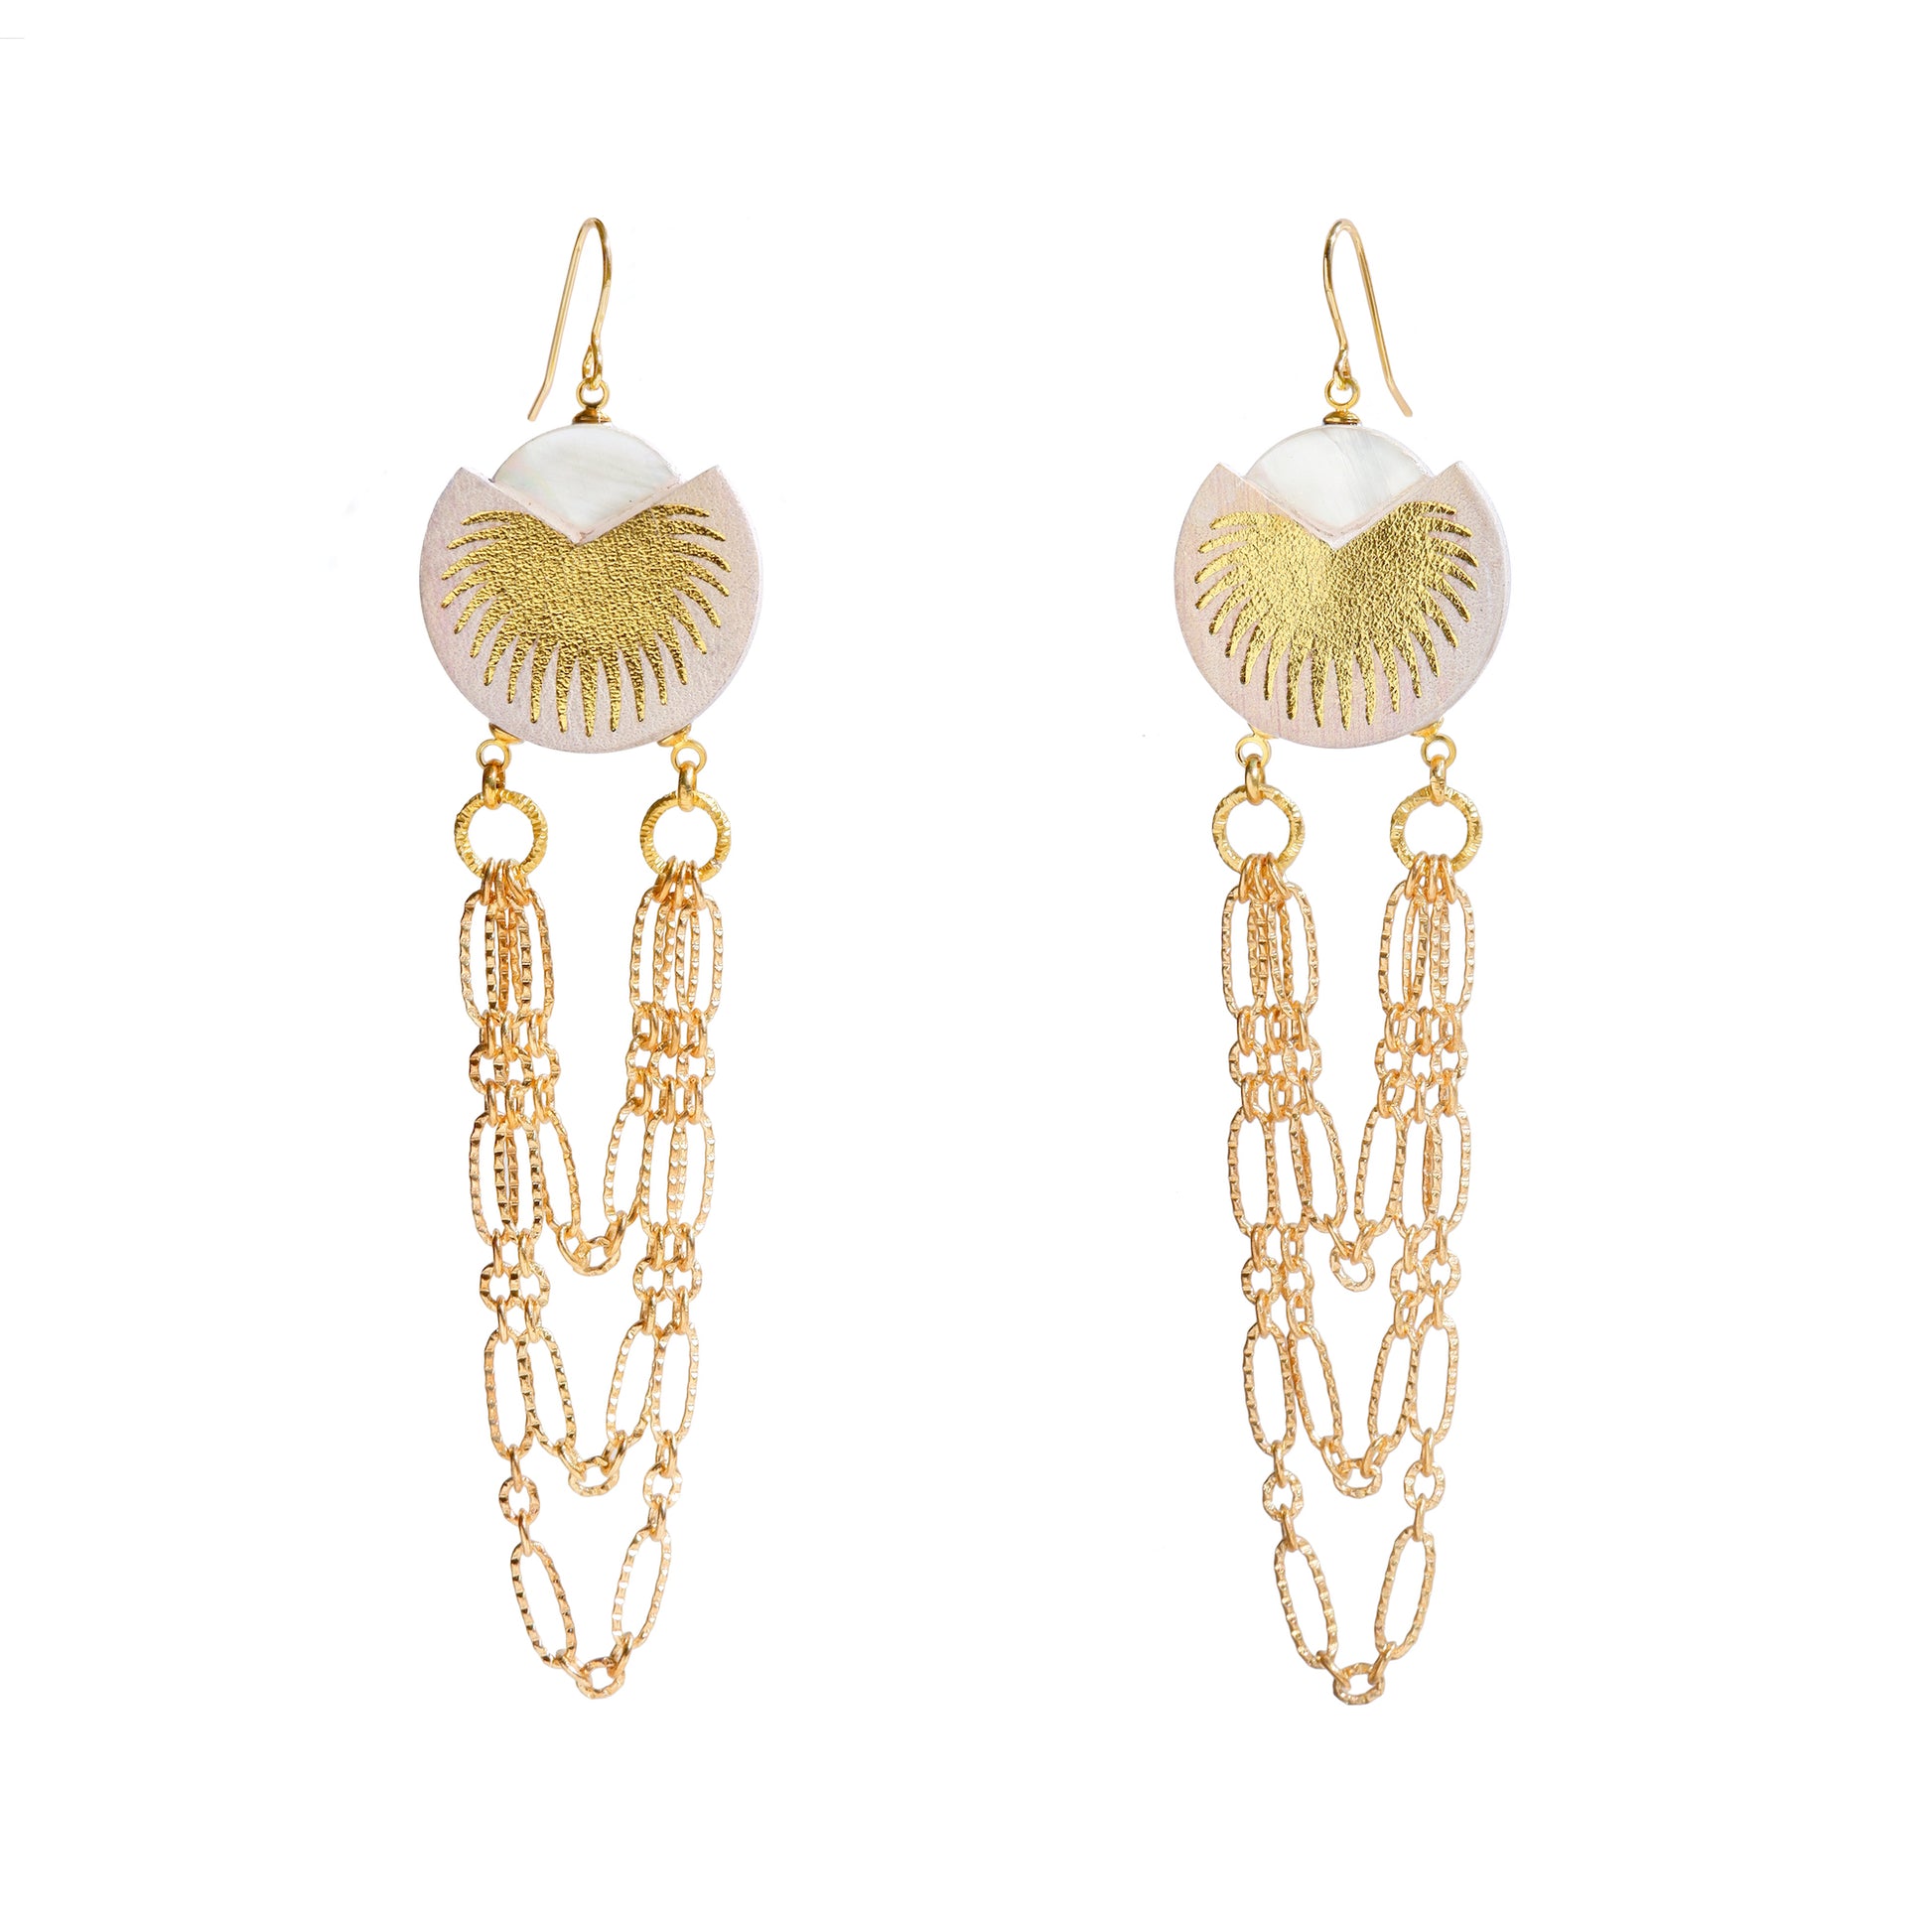 Lilac & gold leather palm tree chain swag chandelier earrings with mother of pearl